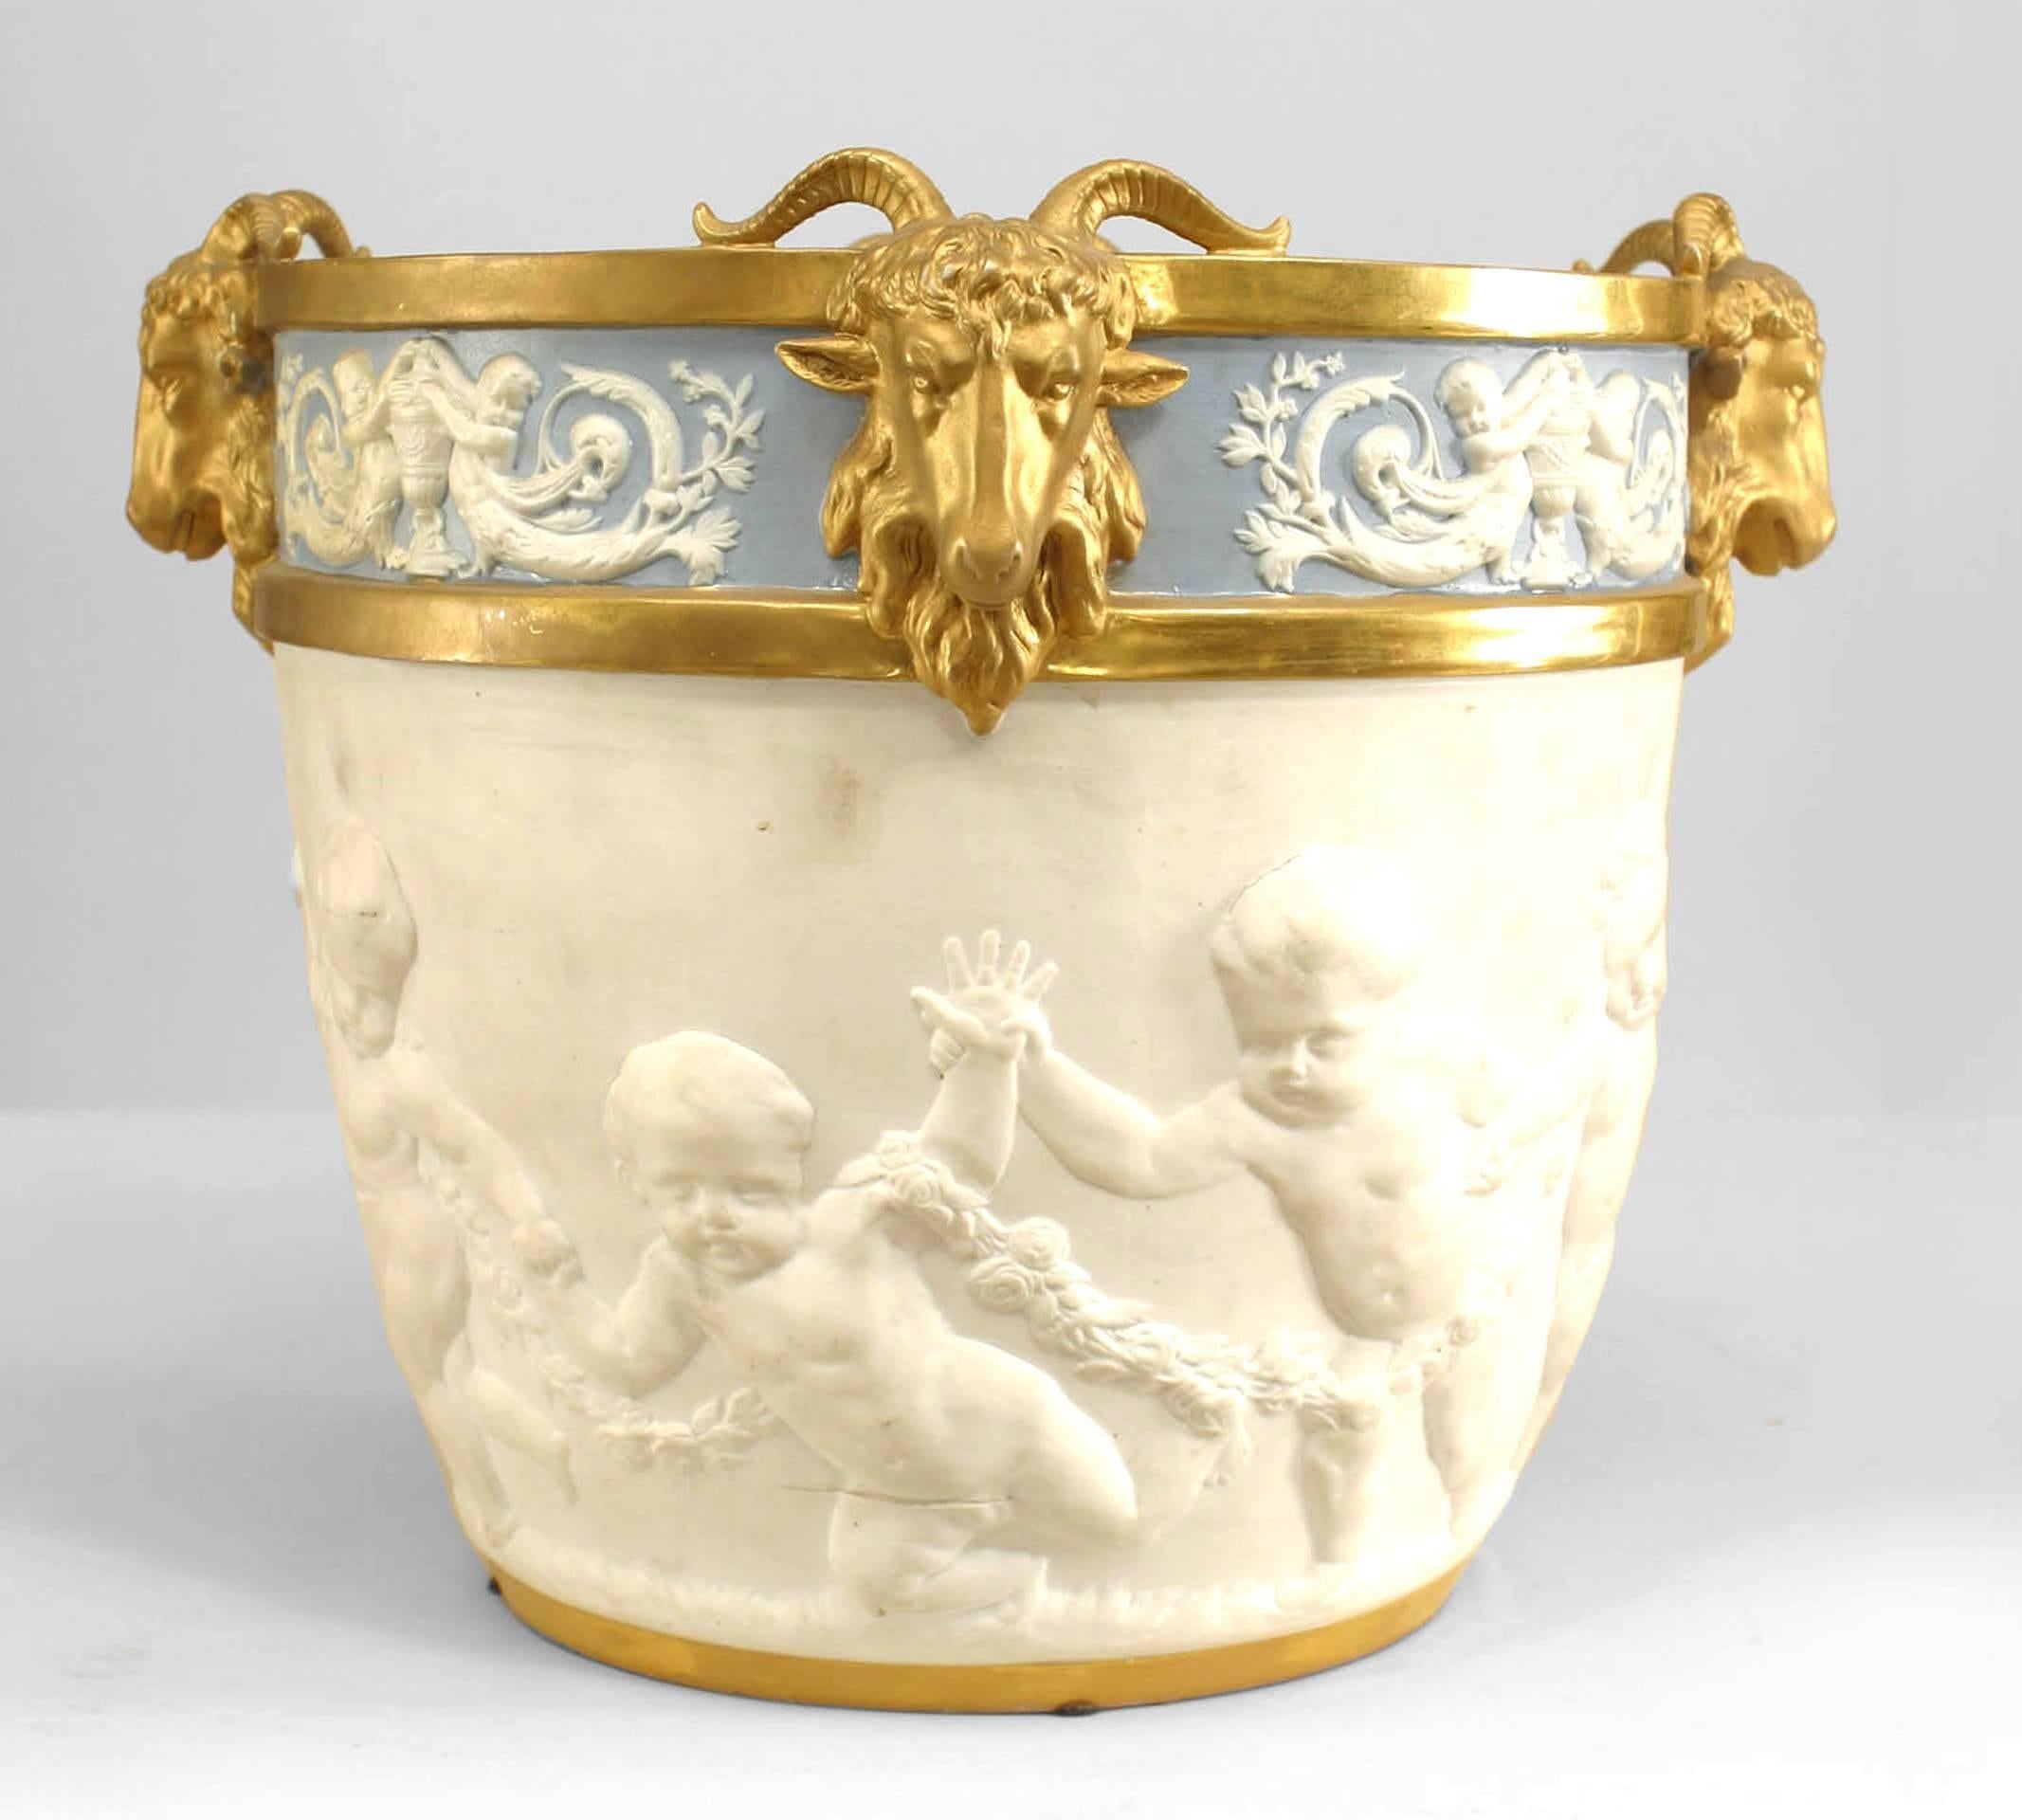 Pair of French Louis XVI-style (19th Century) blue and white Sevres (Samson) porcelain jardinieres with 4 gilt ram heads (Estate of Evelyn Walsh McLean, Washington, D.C.)
